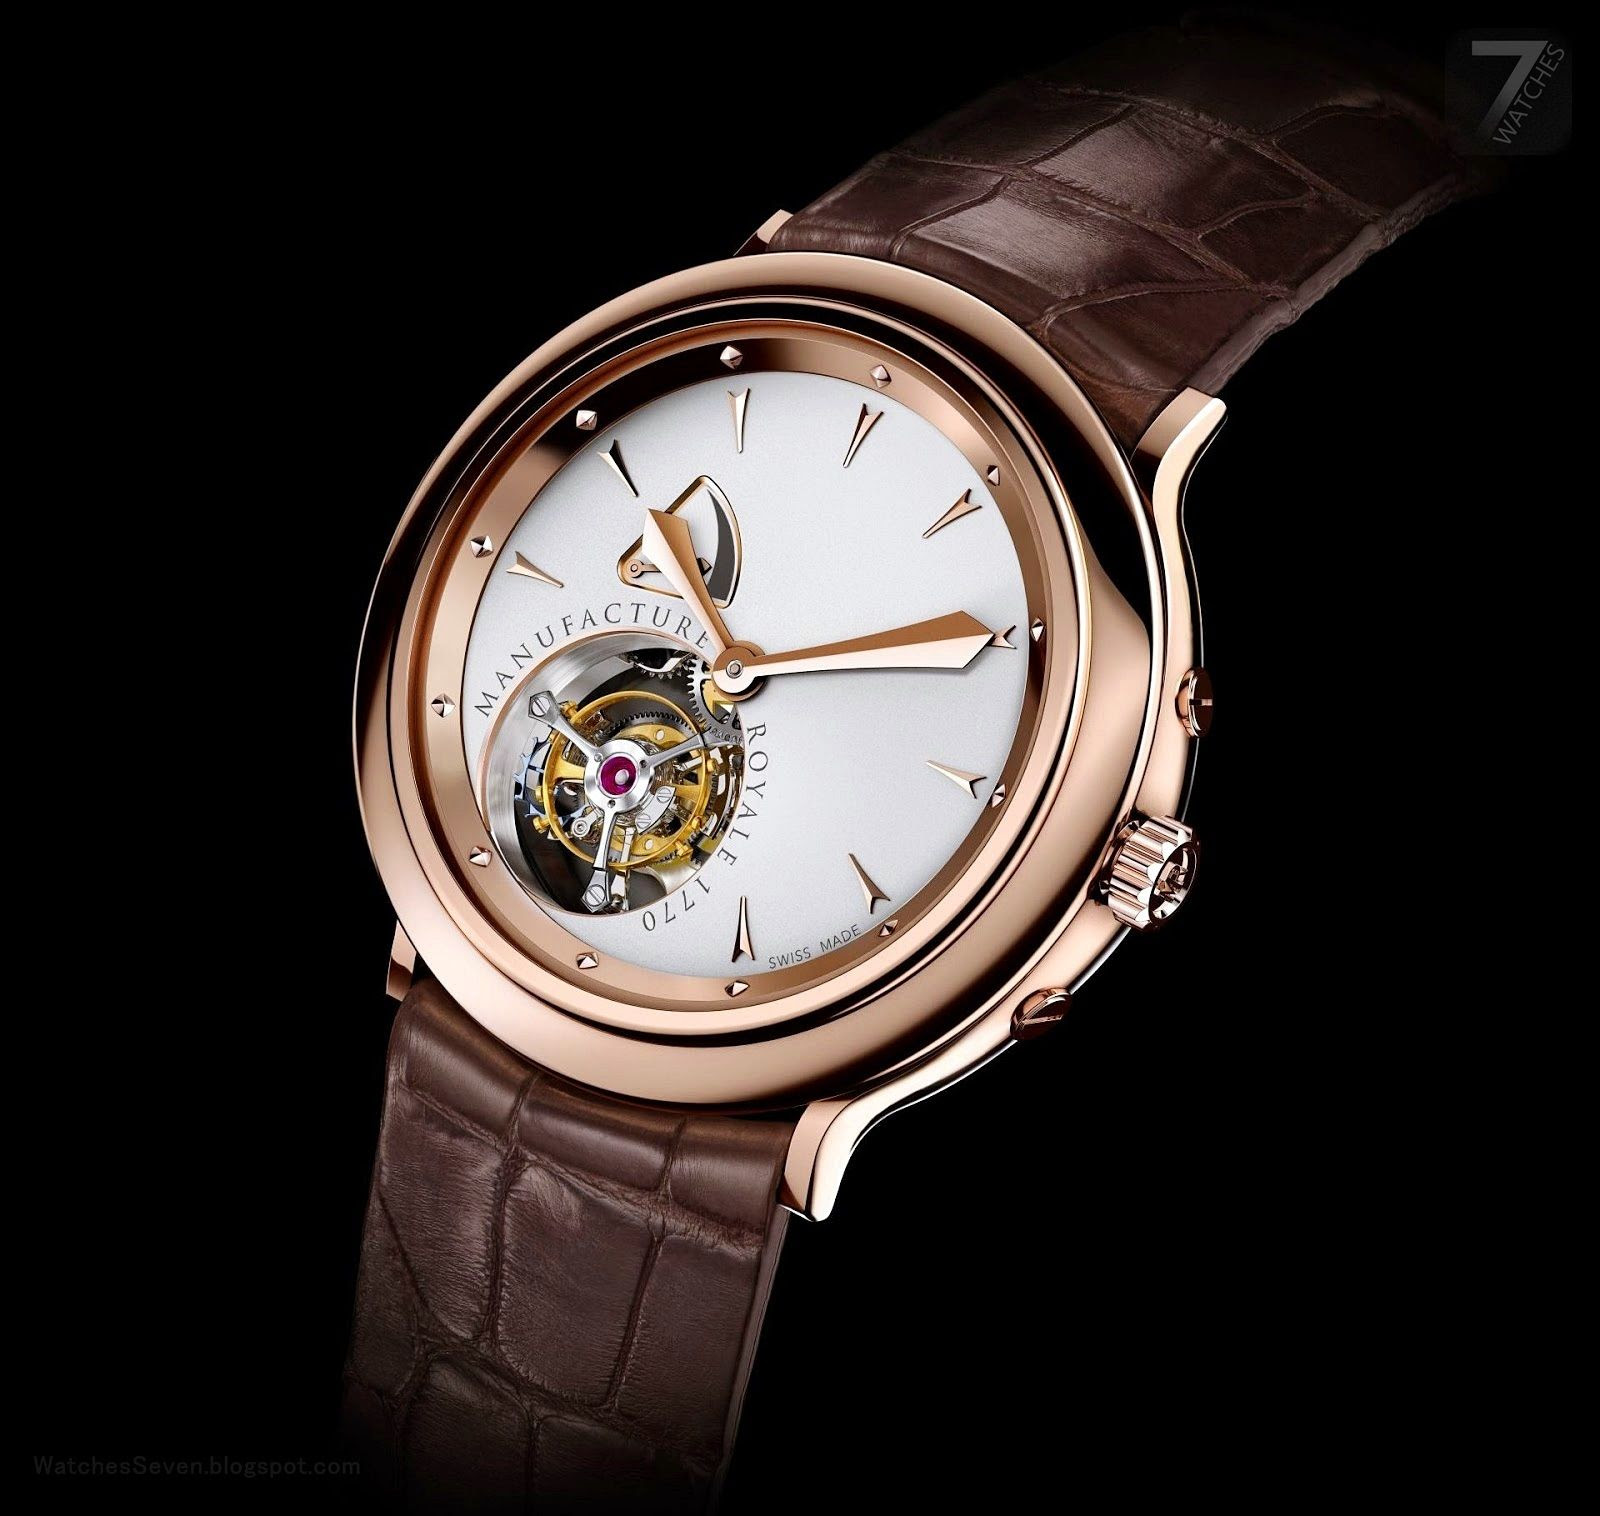 Watches 7: Manufacture Royale – 1770 FLYING Tourbillon